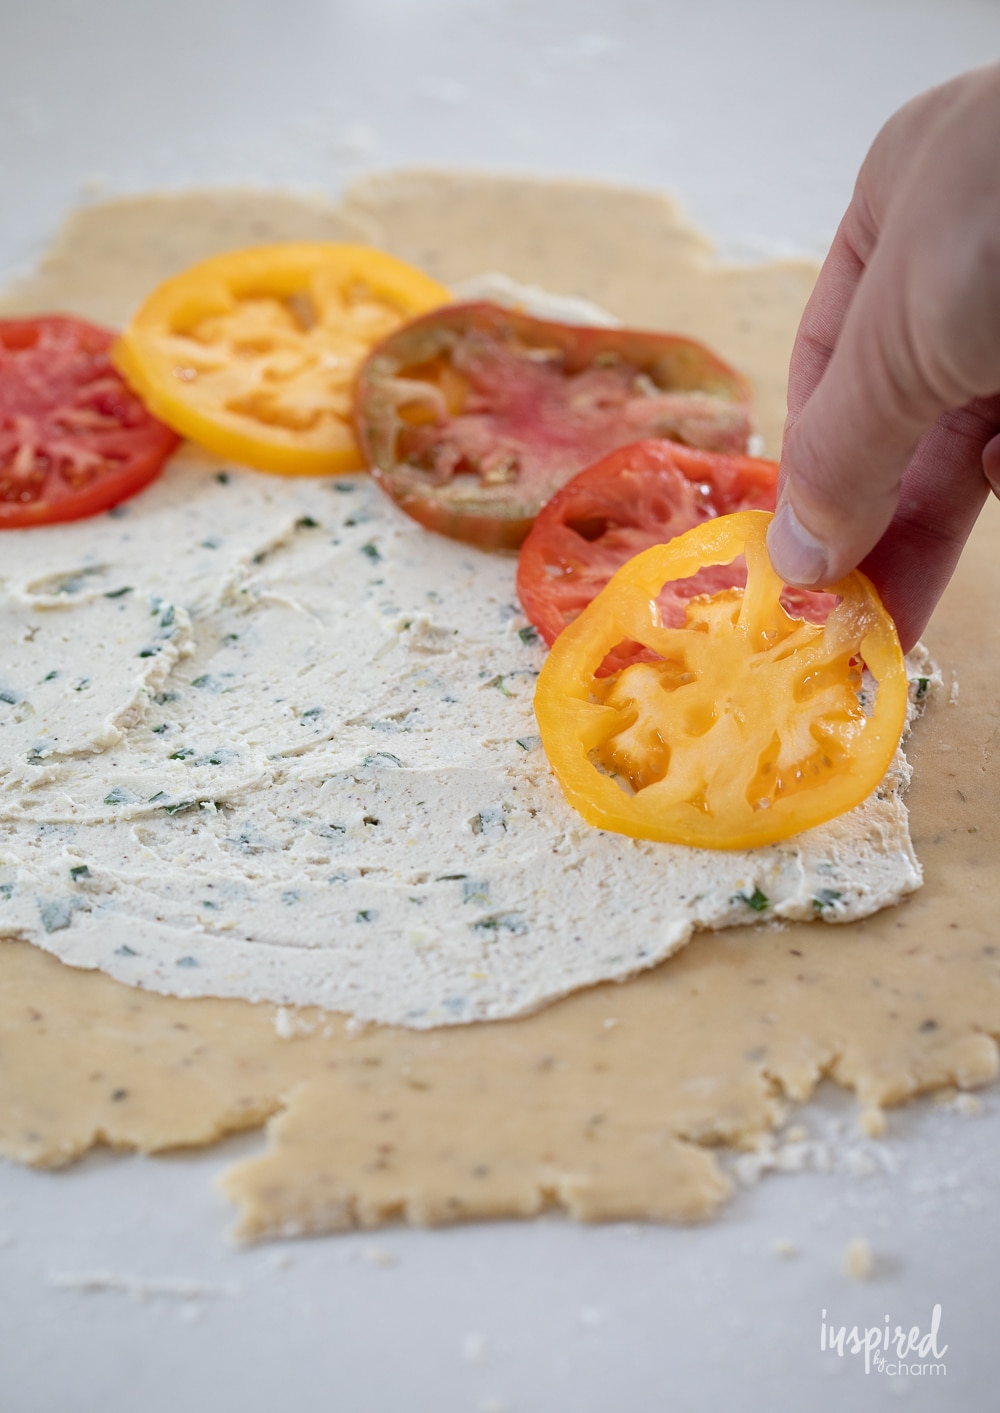 adding tomato slices to a rolled out crust with goat cheese.